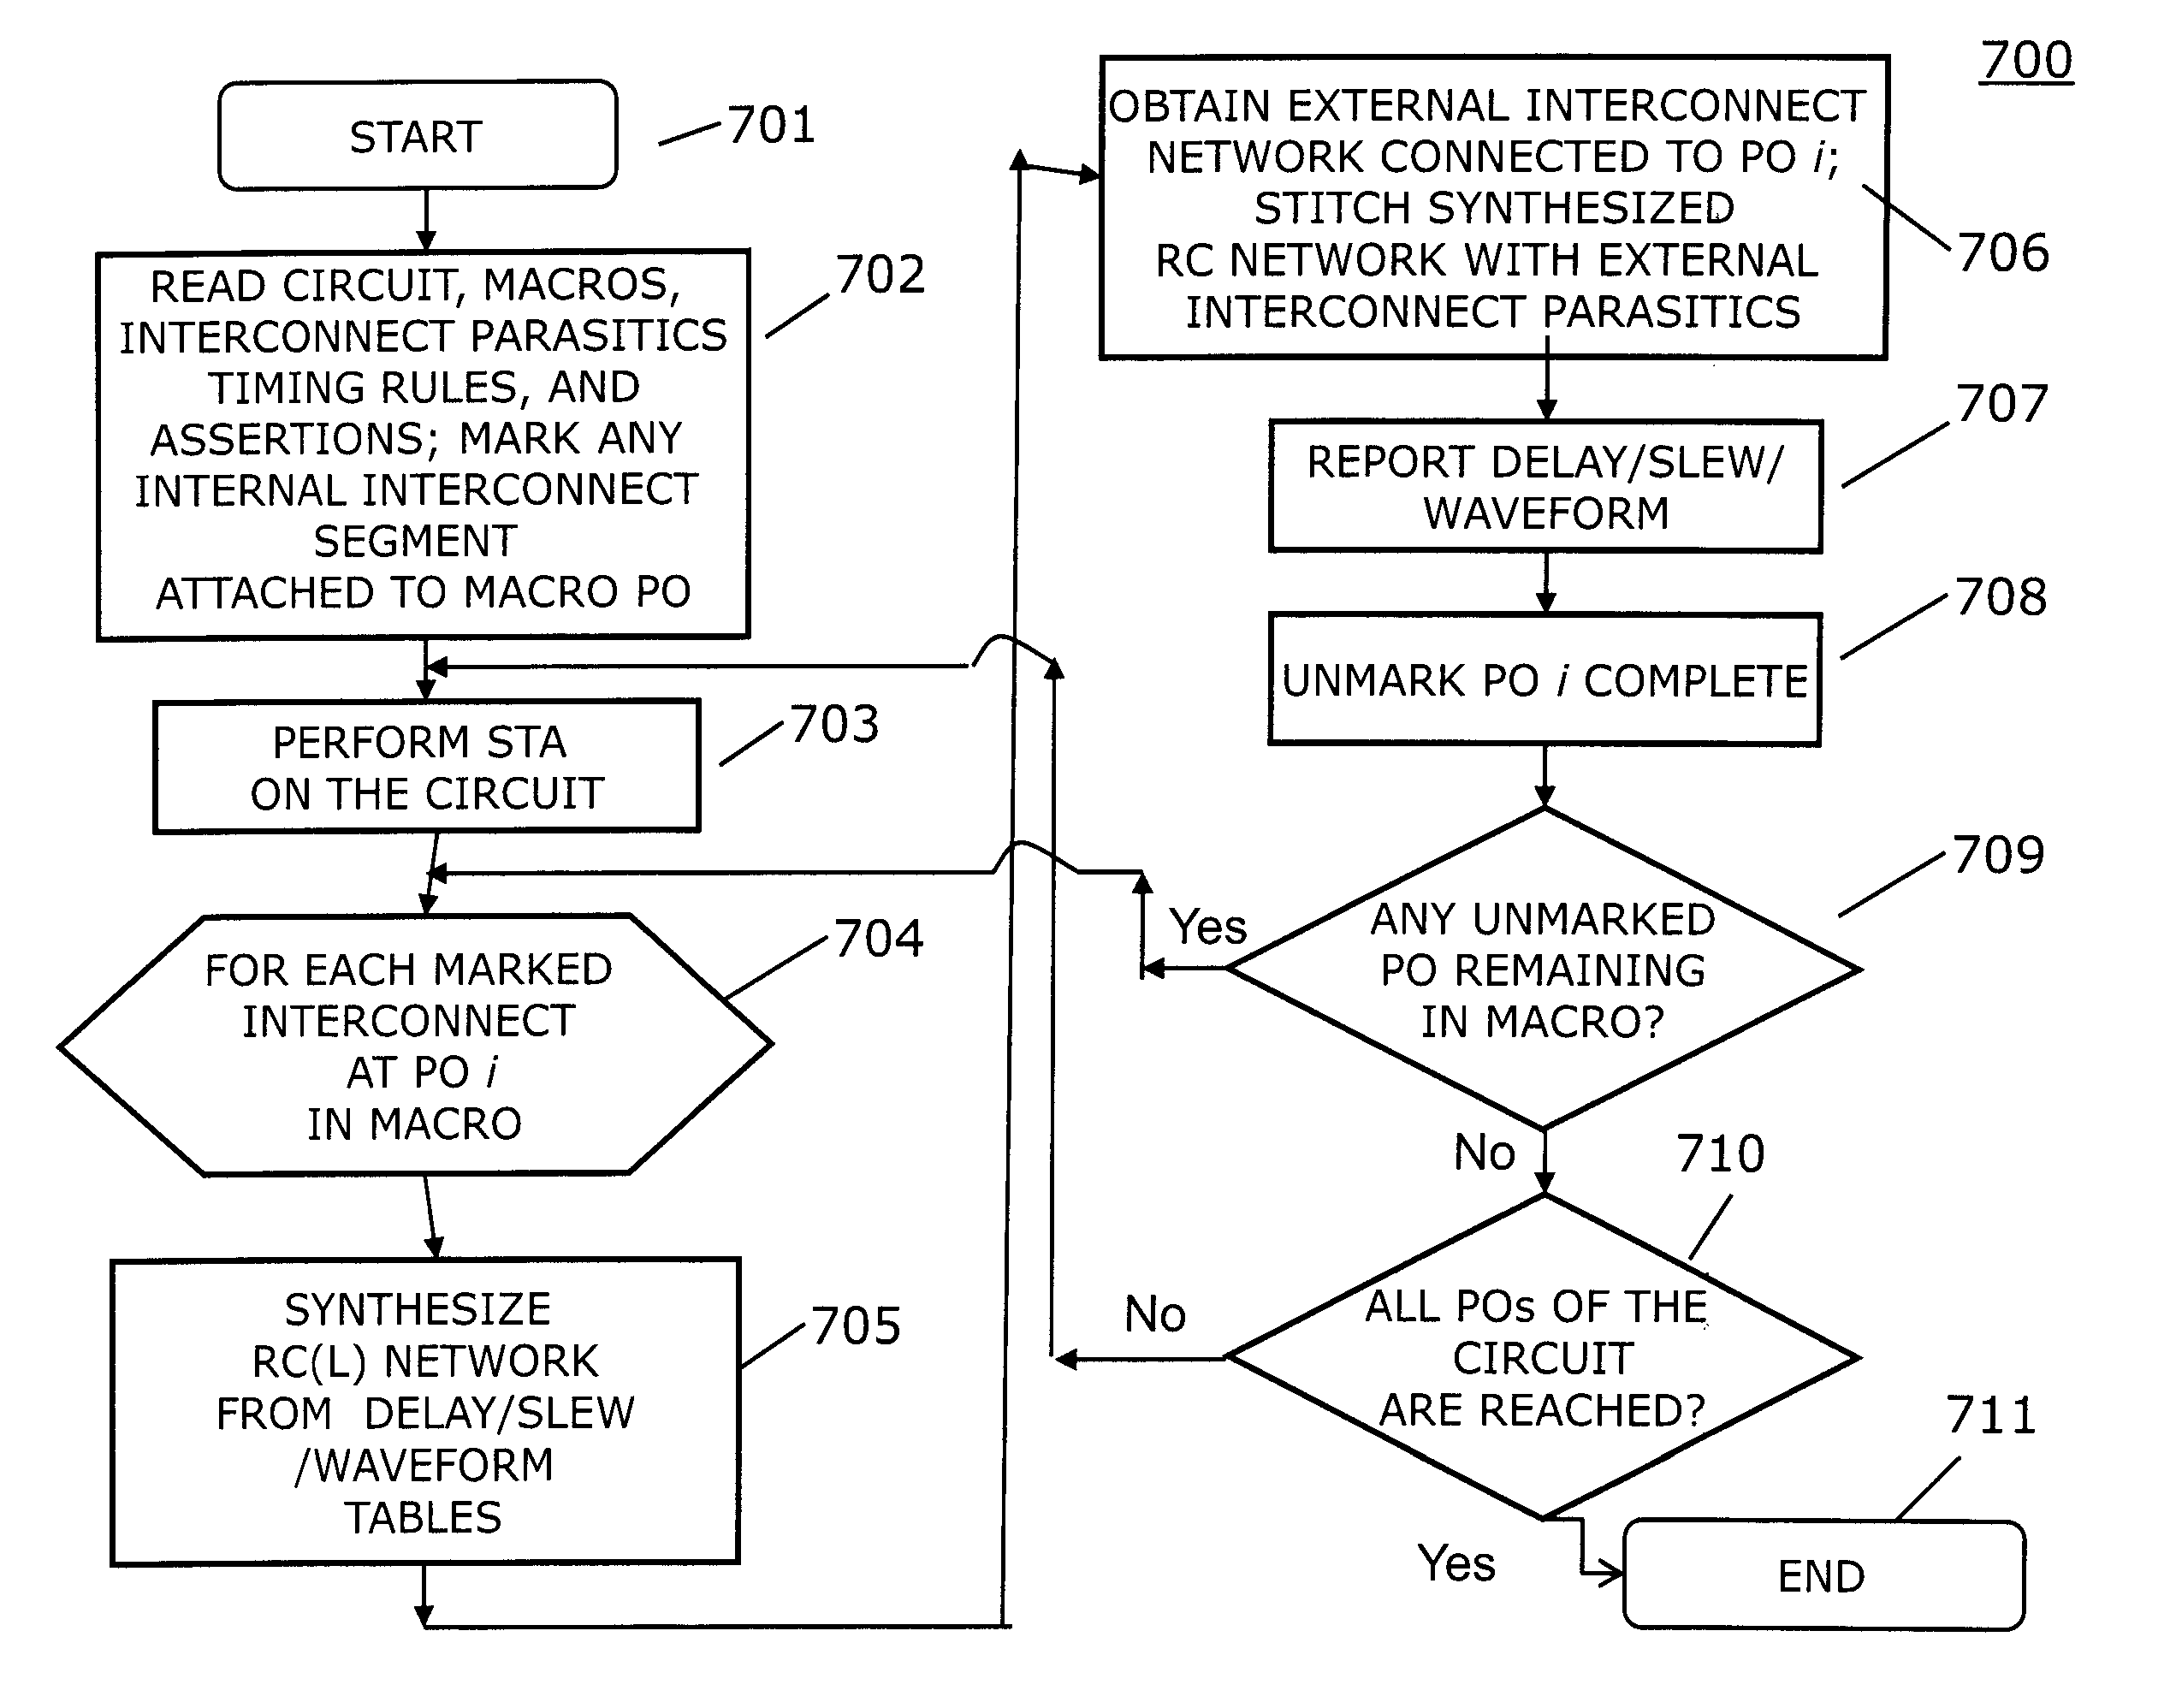 Method of performing static timing analysis considering abstracted cell's interconnect parasitics